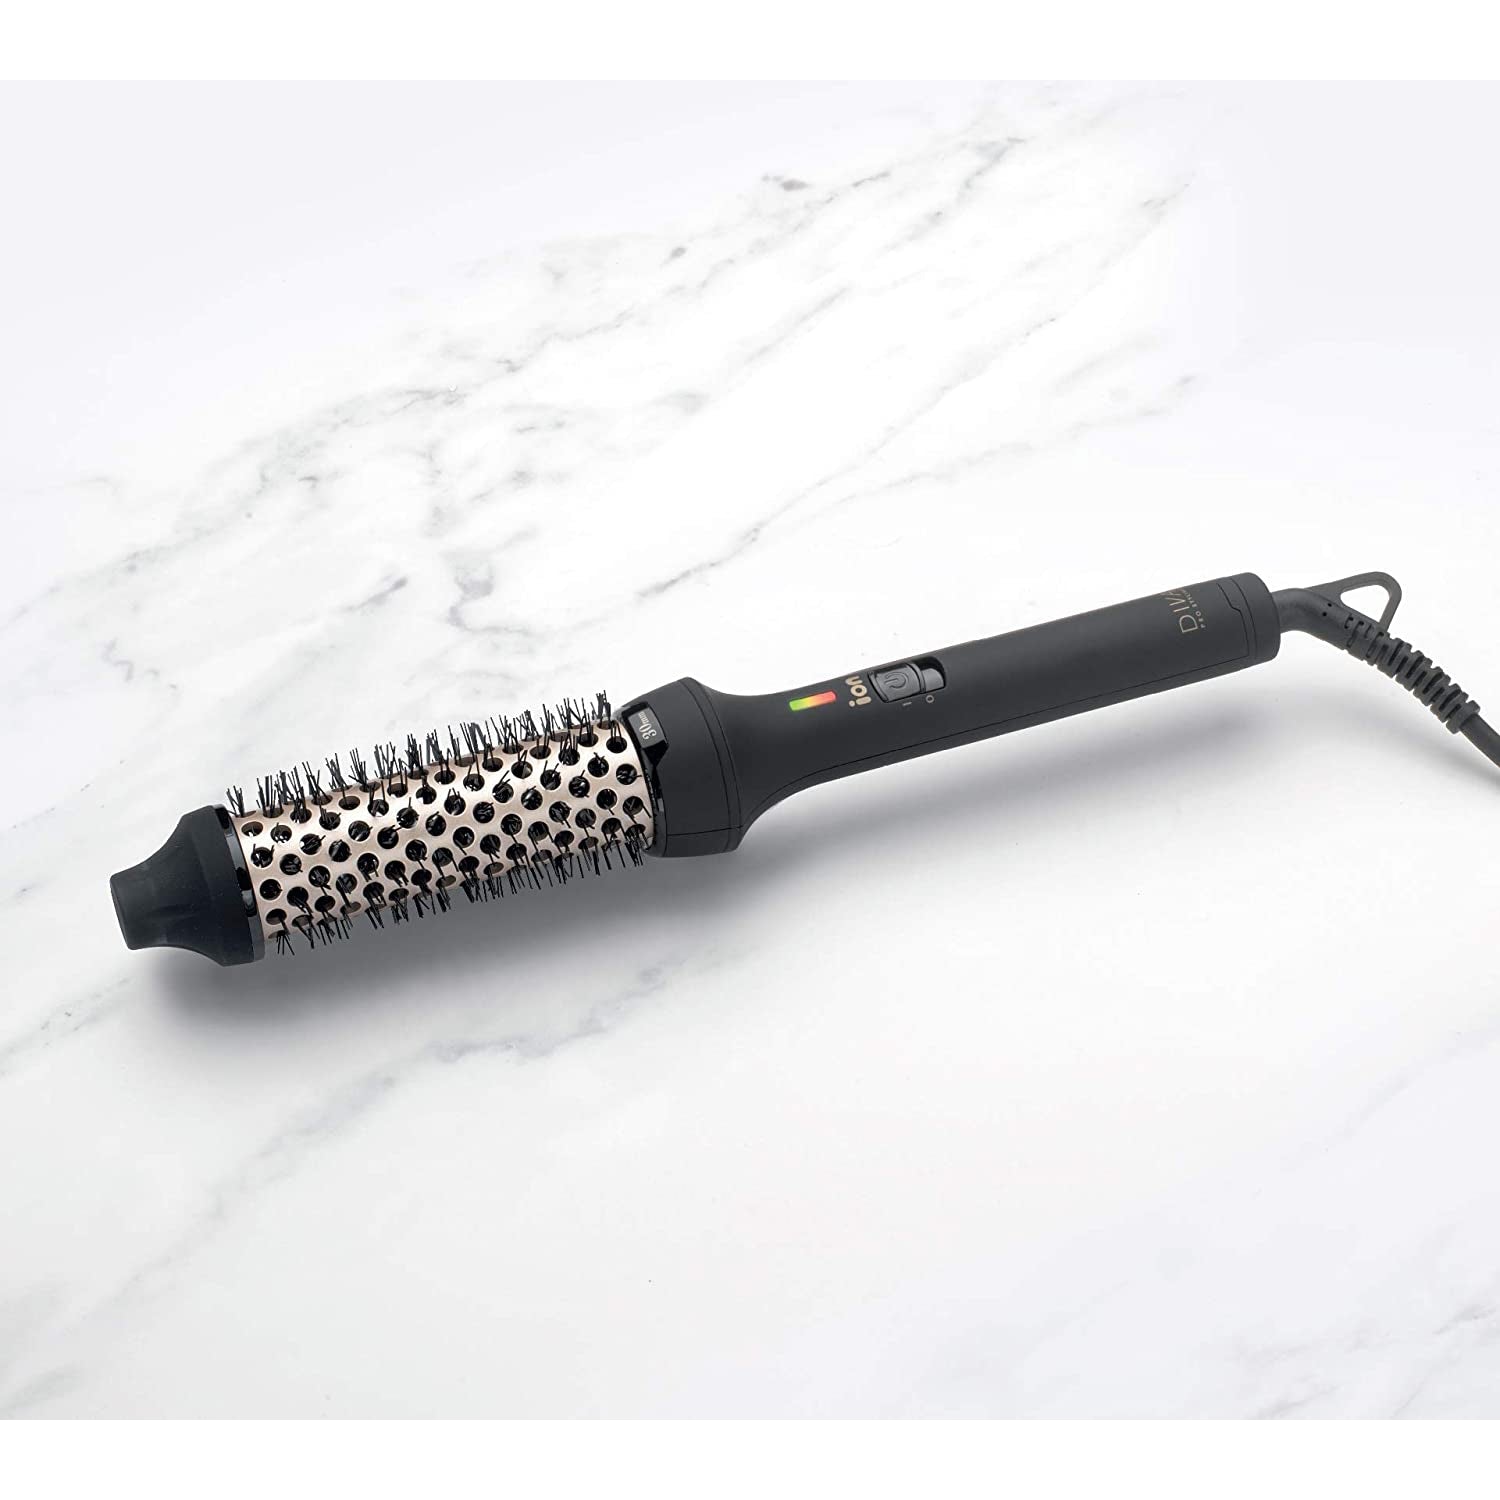 Diva Pro Styling Ceramic Hot Brush 30mm with Ionic Technology